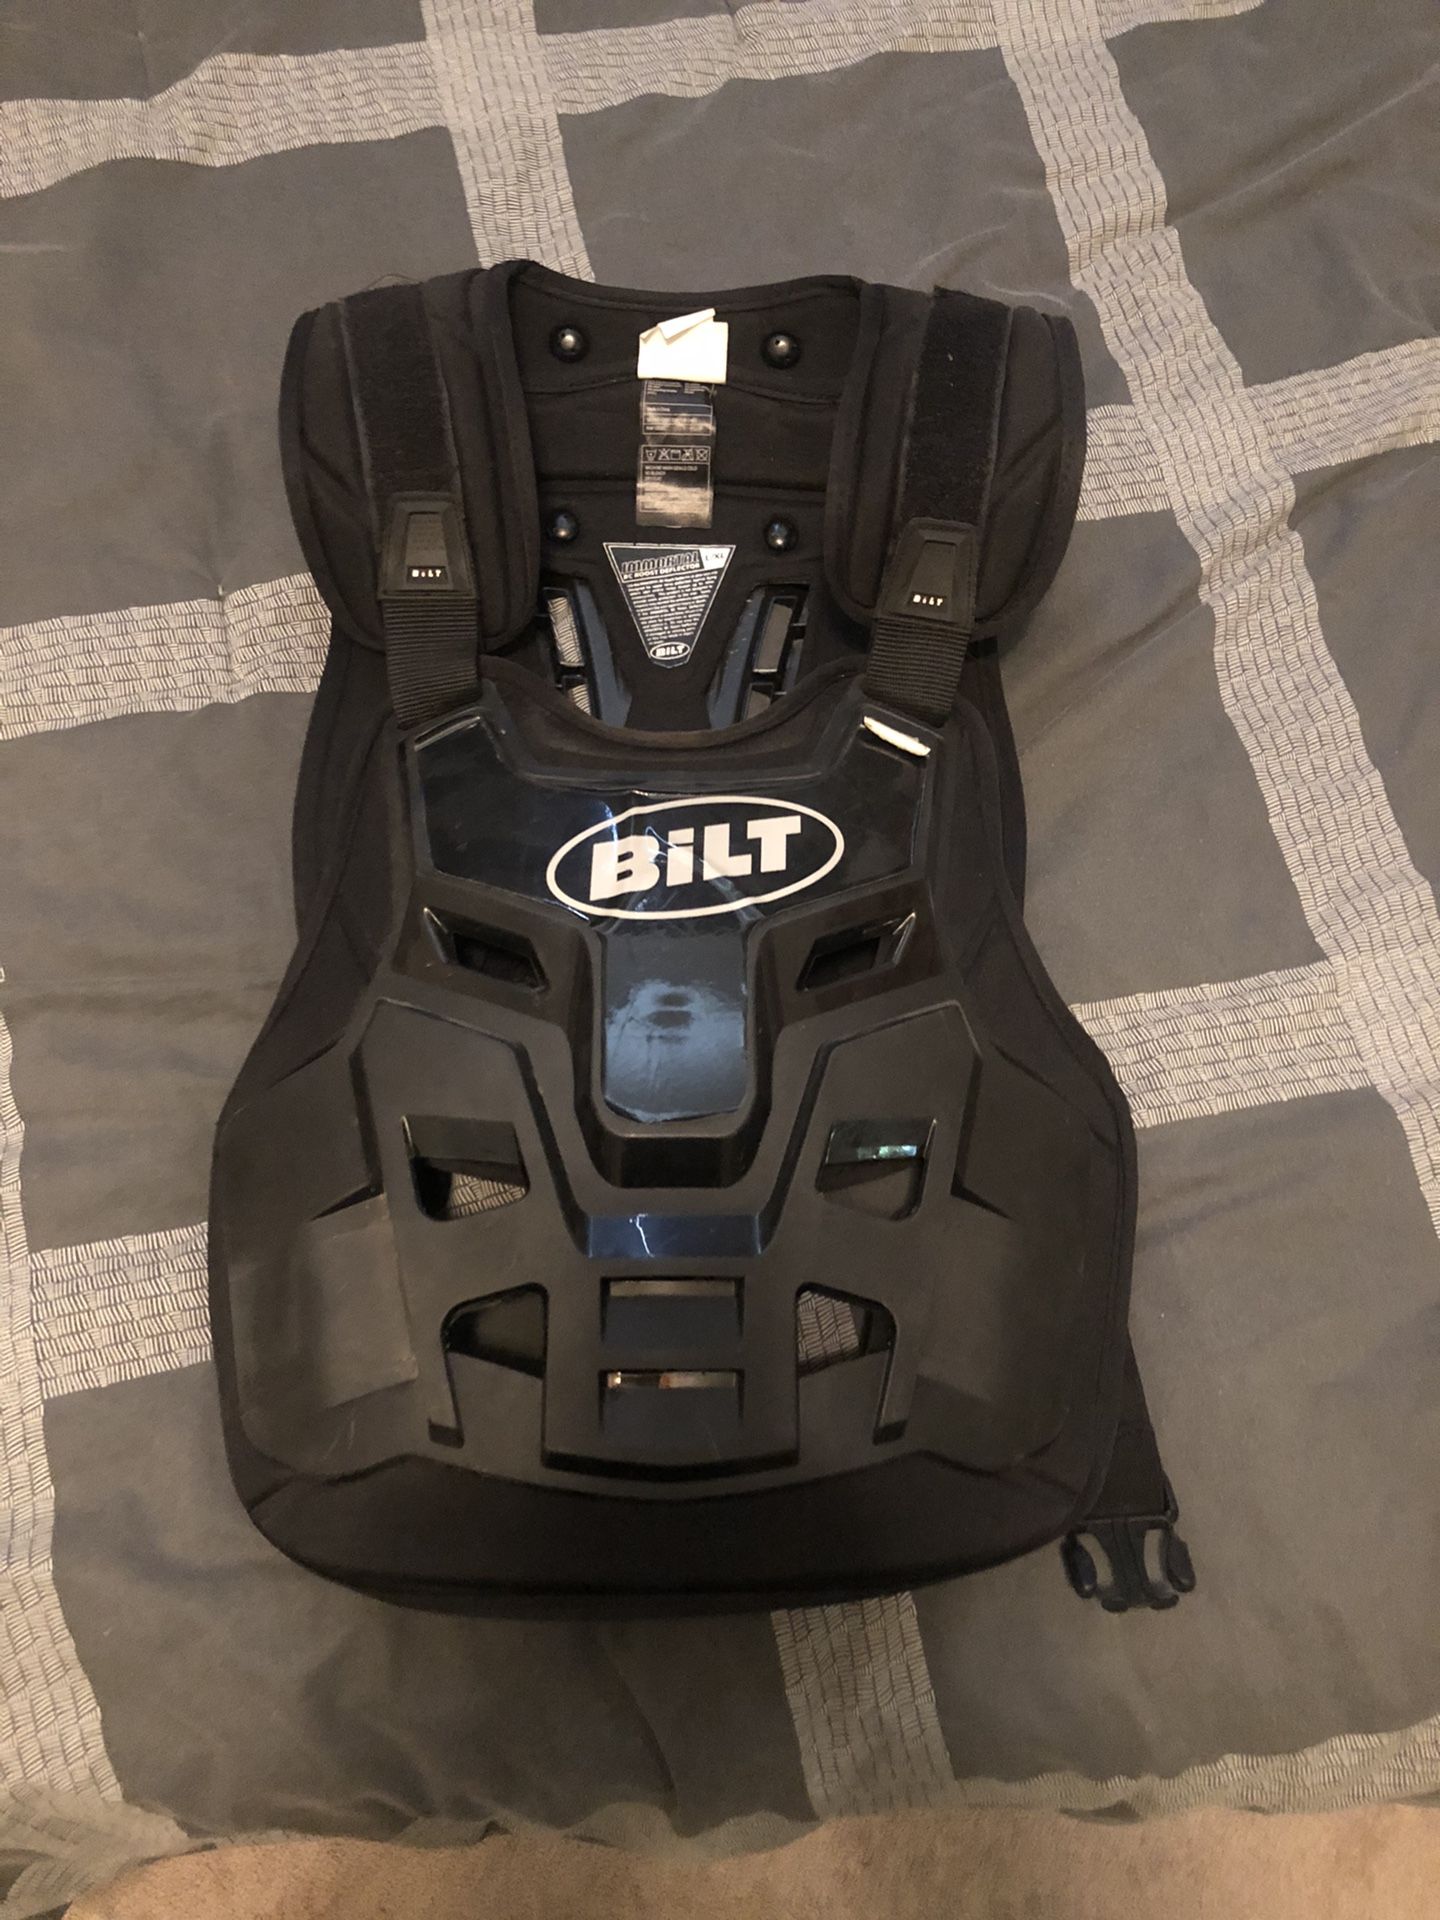 Dirt bike chest protector